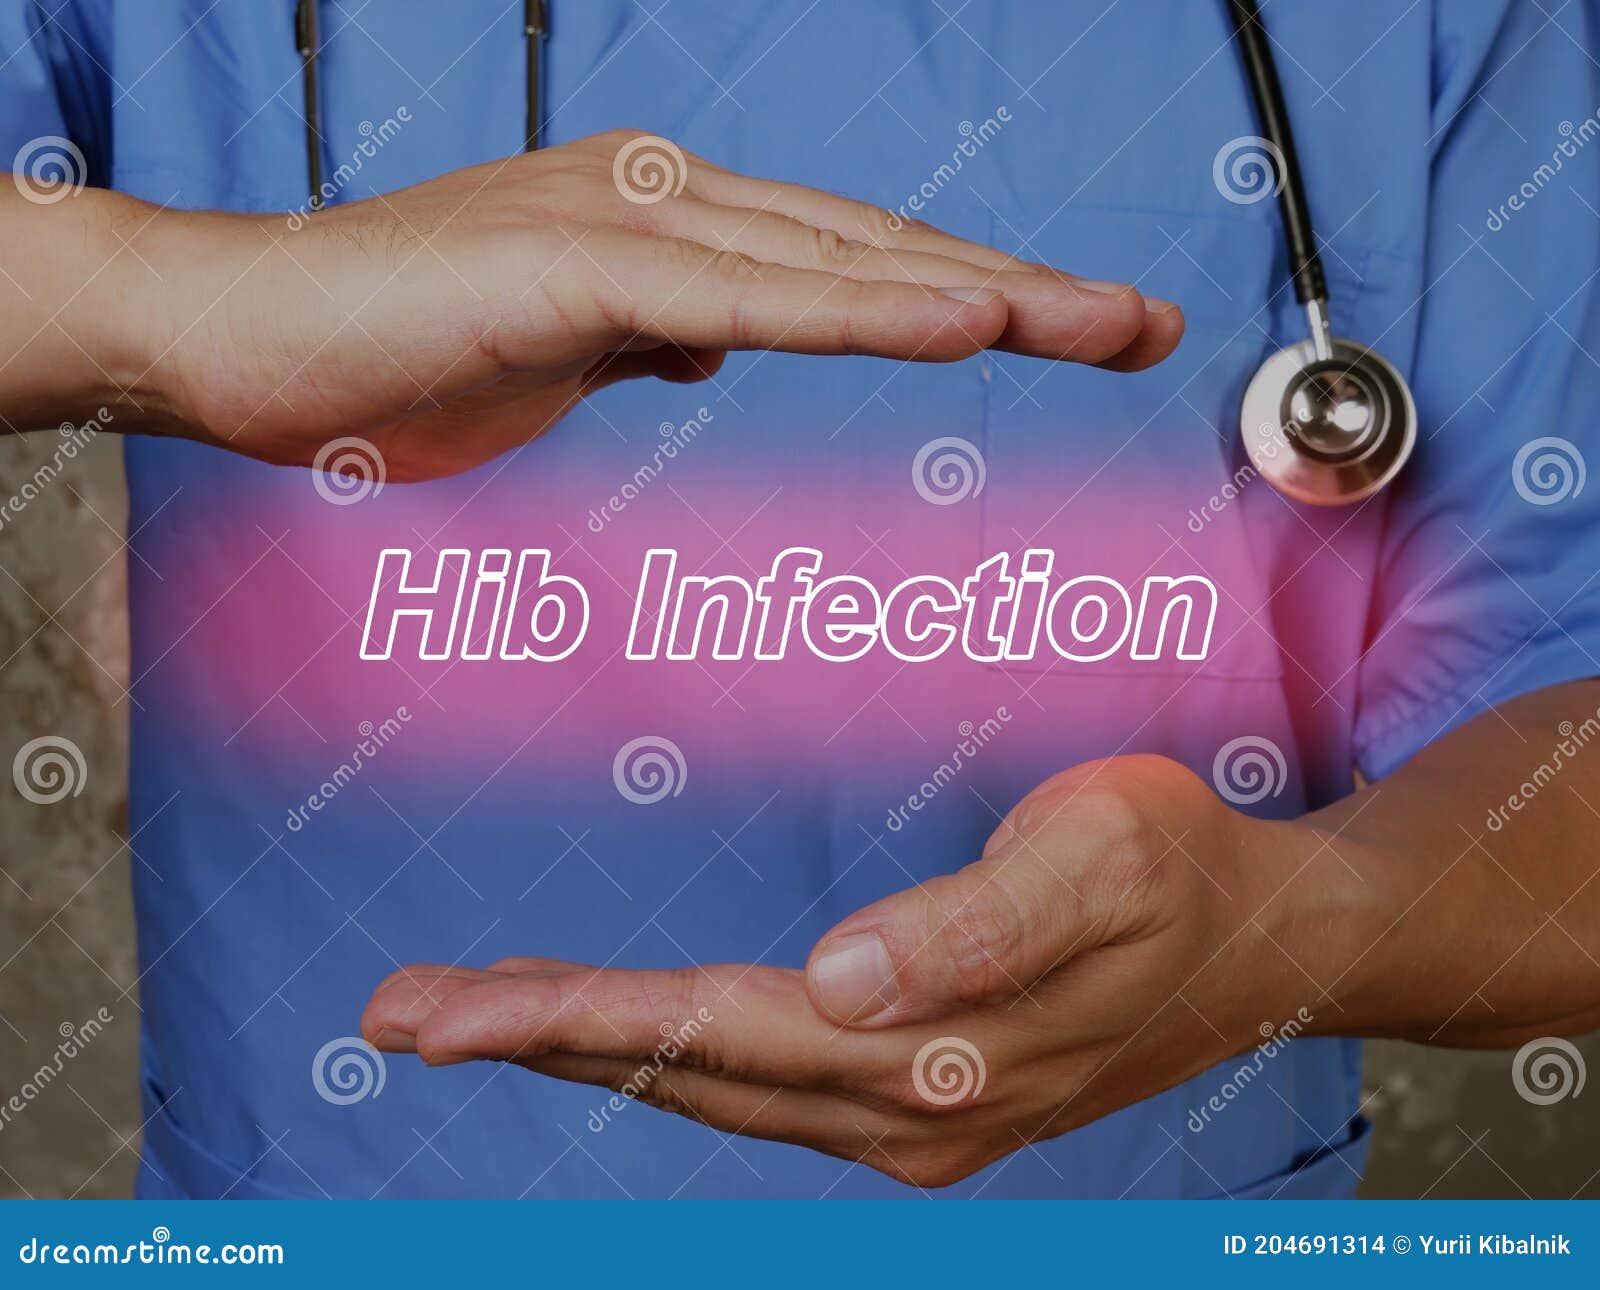 health care concept about hib infection  with inscription on the sheet